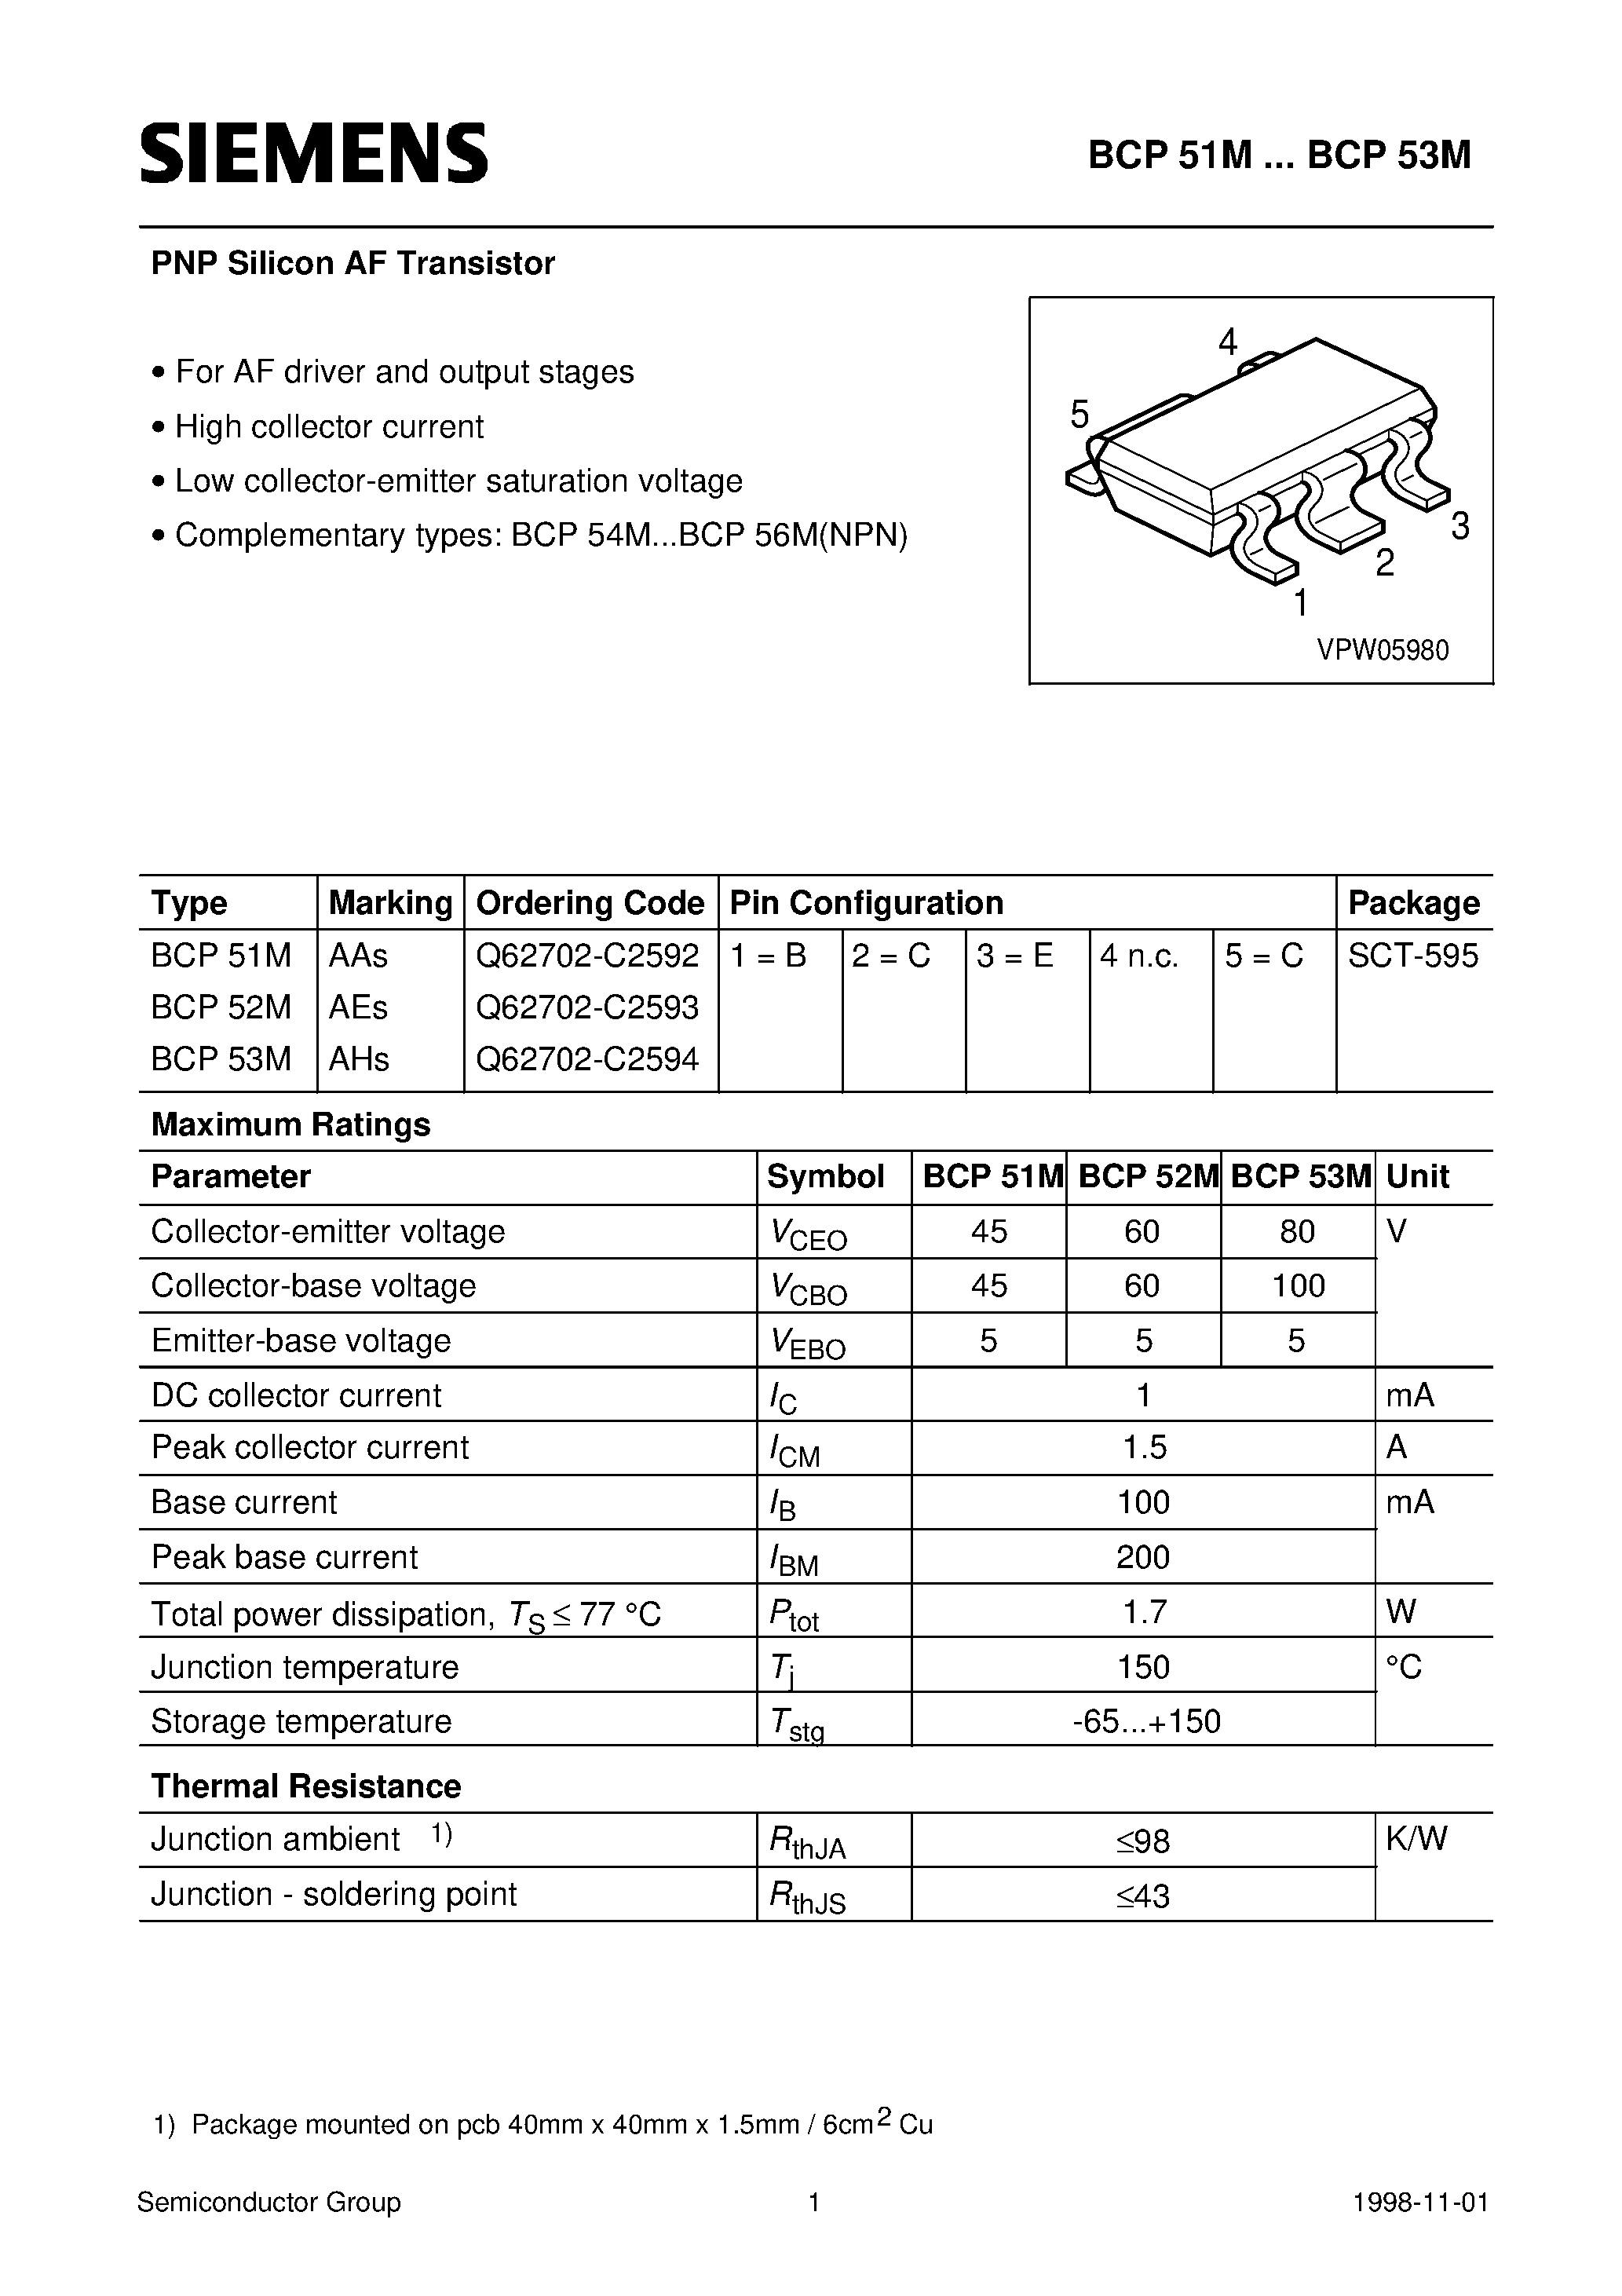 Datasheet BCP51MBCP53M - PNP Silicon AF Transistor (For AF driver and output stages High collector current) page 1